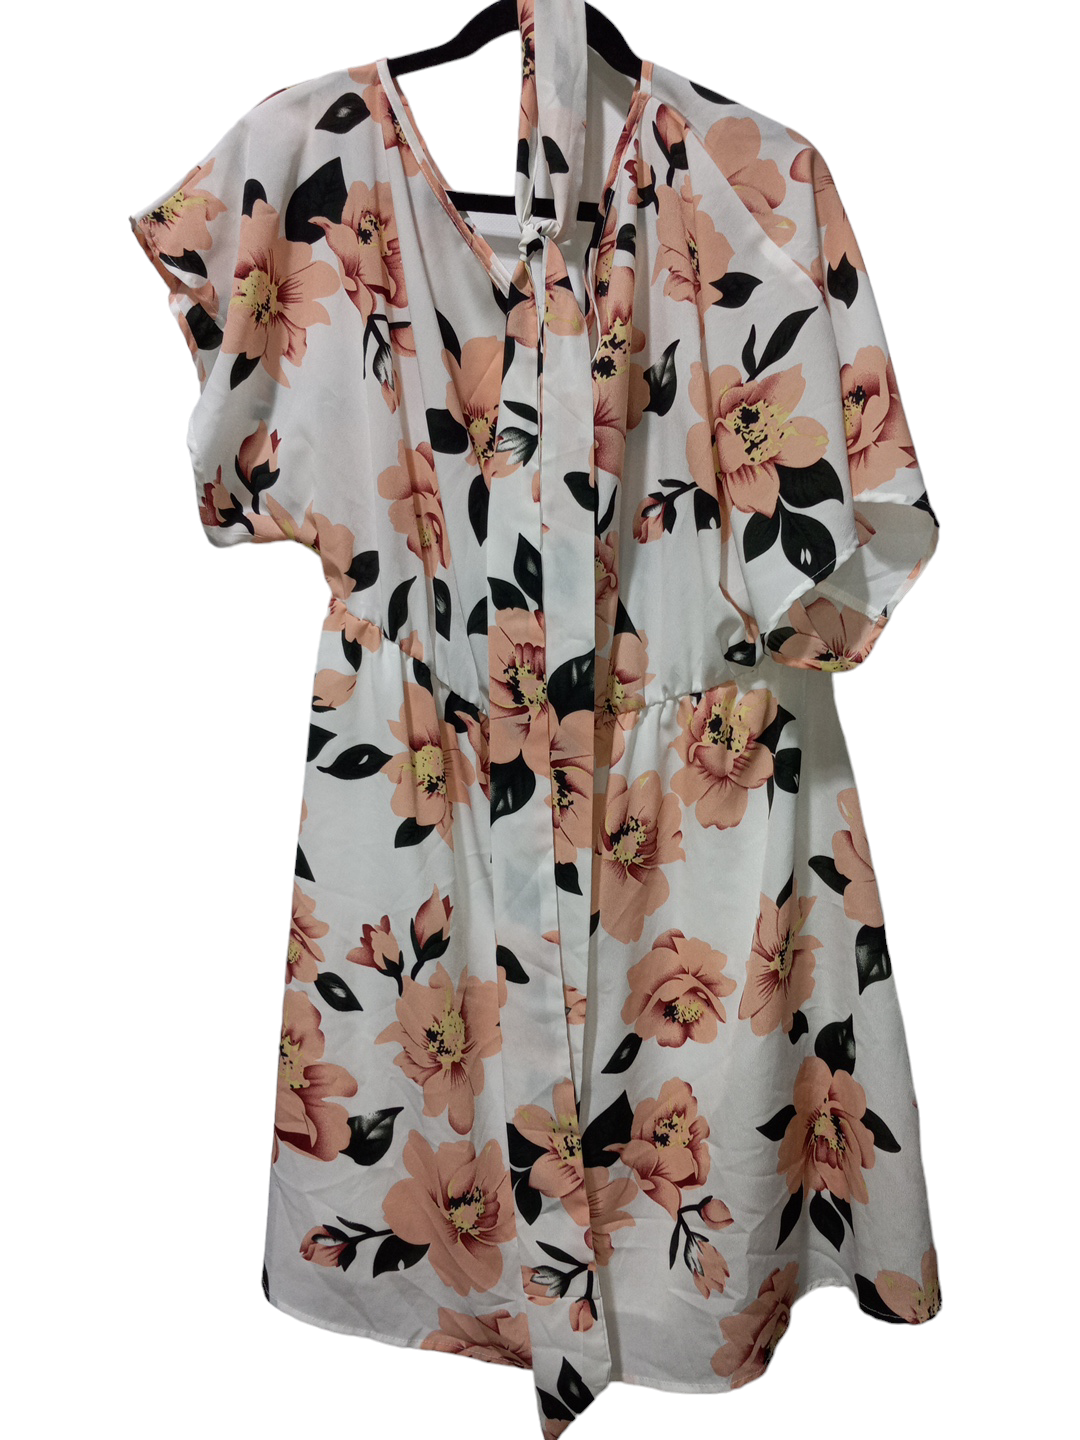 Floral Print Dress Casual Short Shein, Size 1x